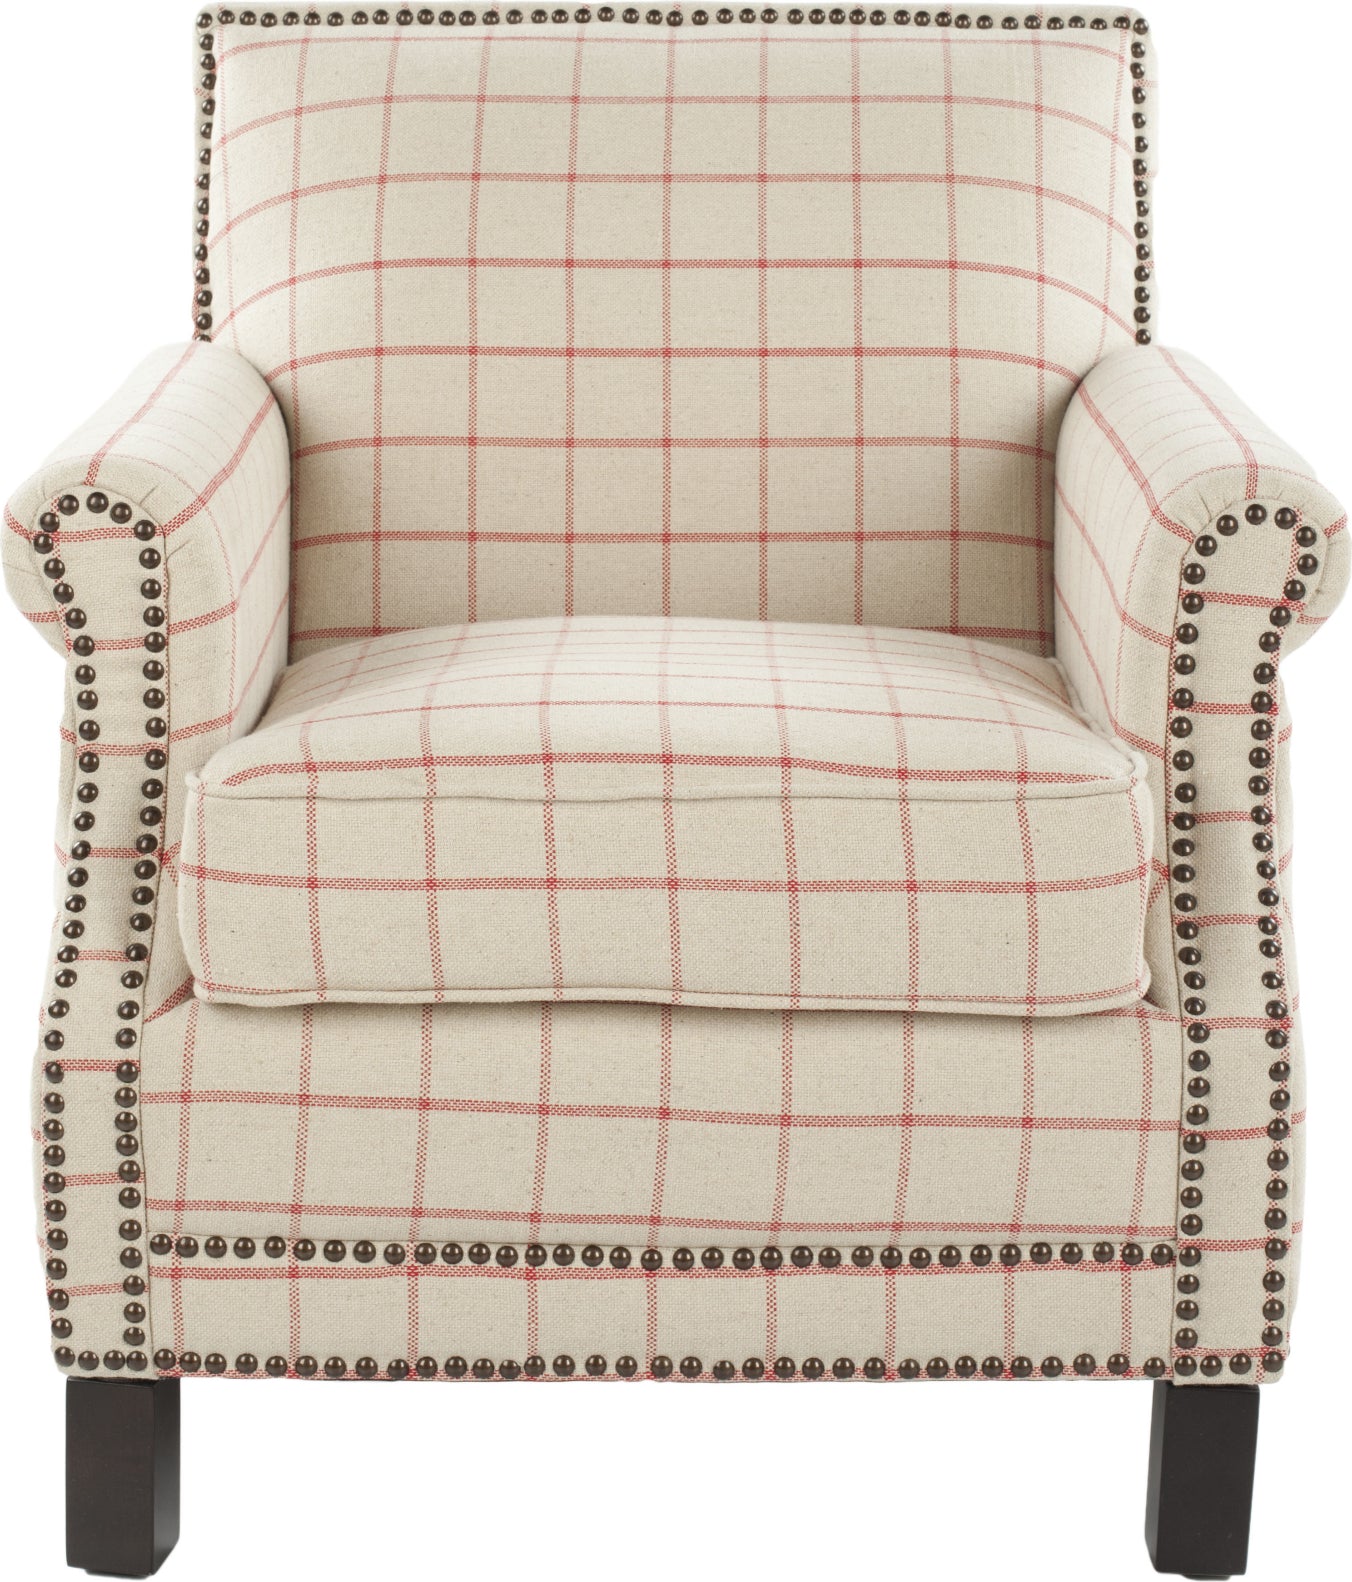 Safavieh Easton Club Chair In Plaid-Brass Nail Heads Taupe and Orange Espresso Furniture main image